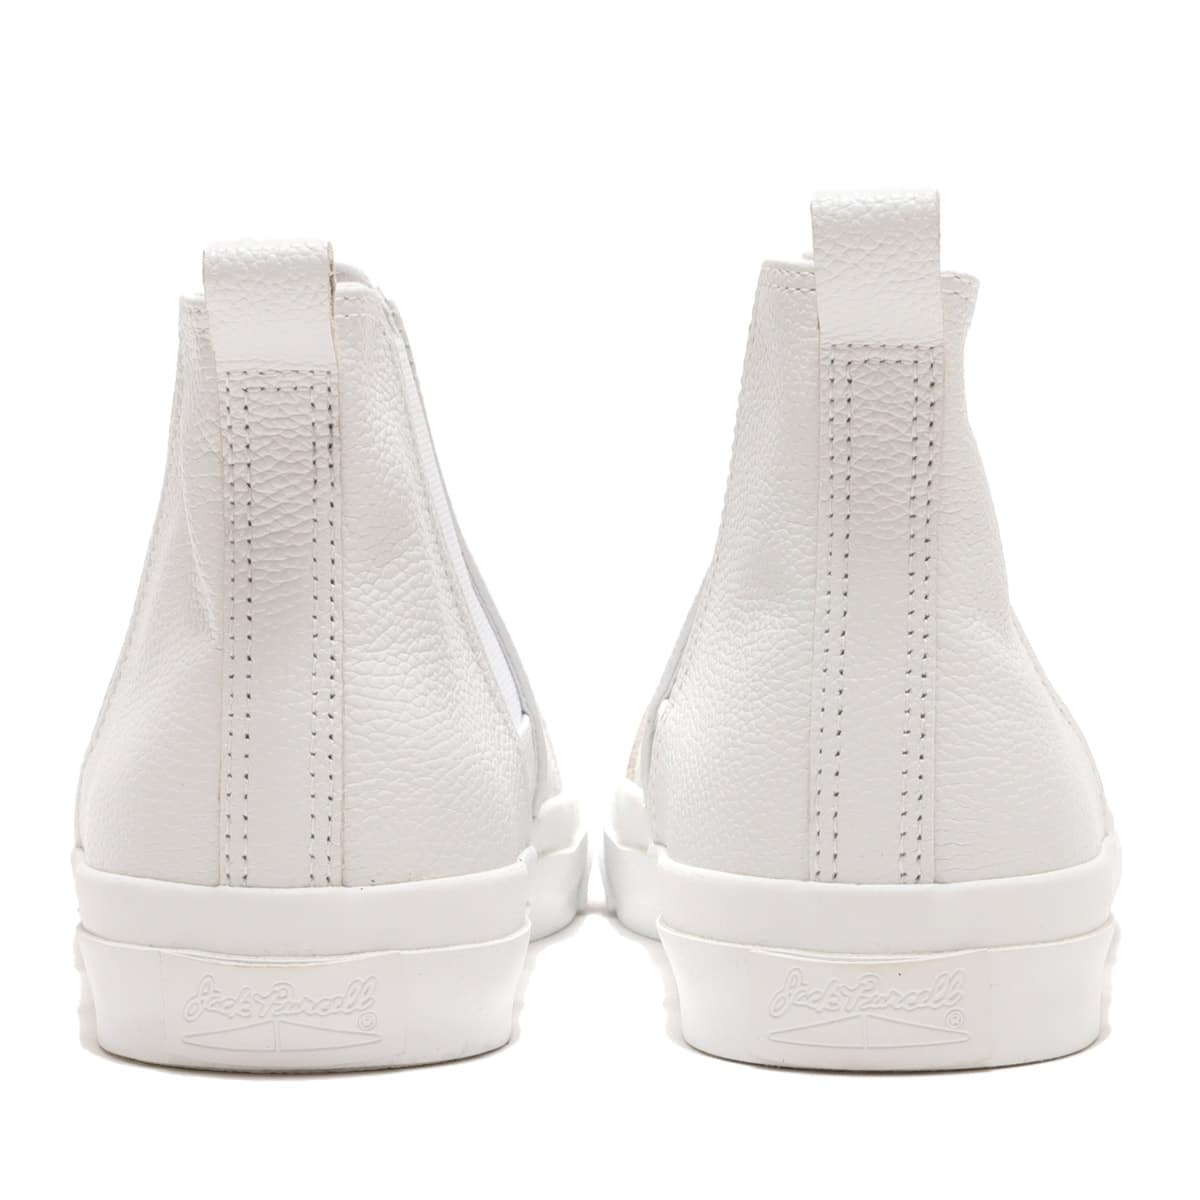 CONVERSE JACK PURCELL LEATHER SIDEGORE RH WHITE 22FW-I